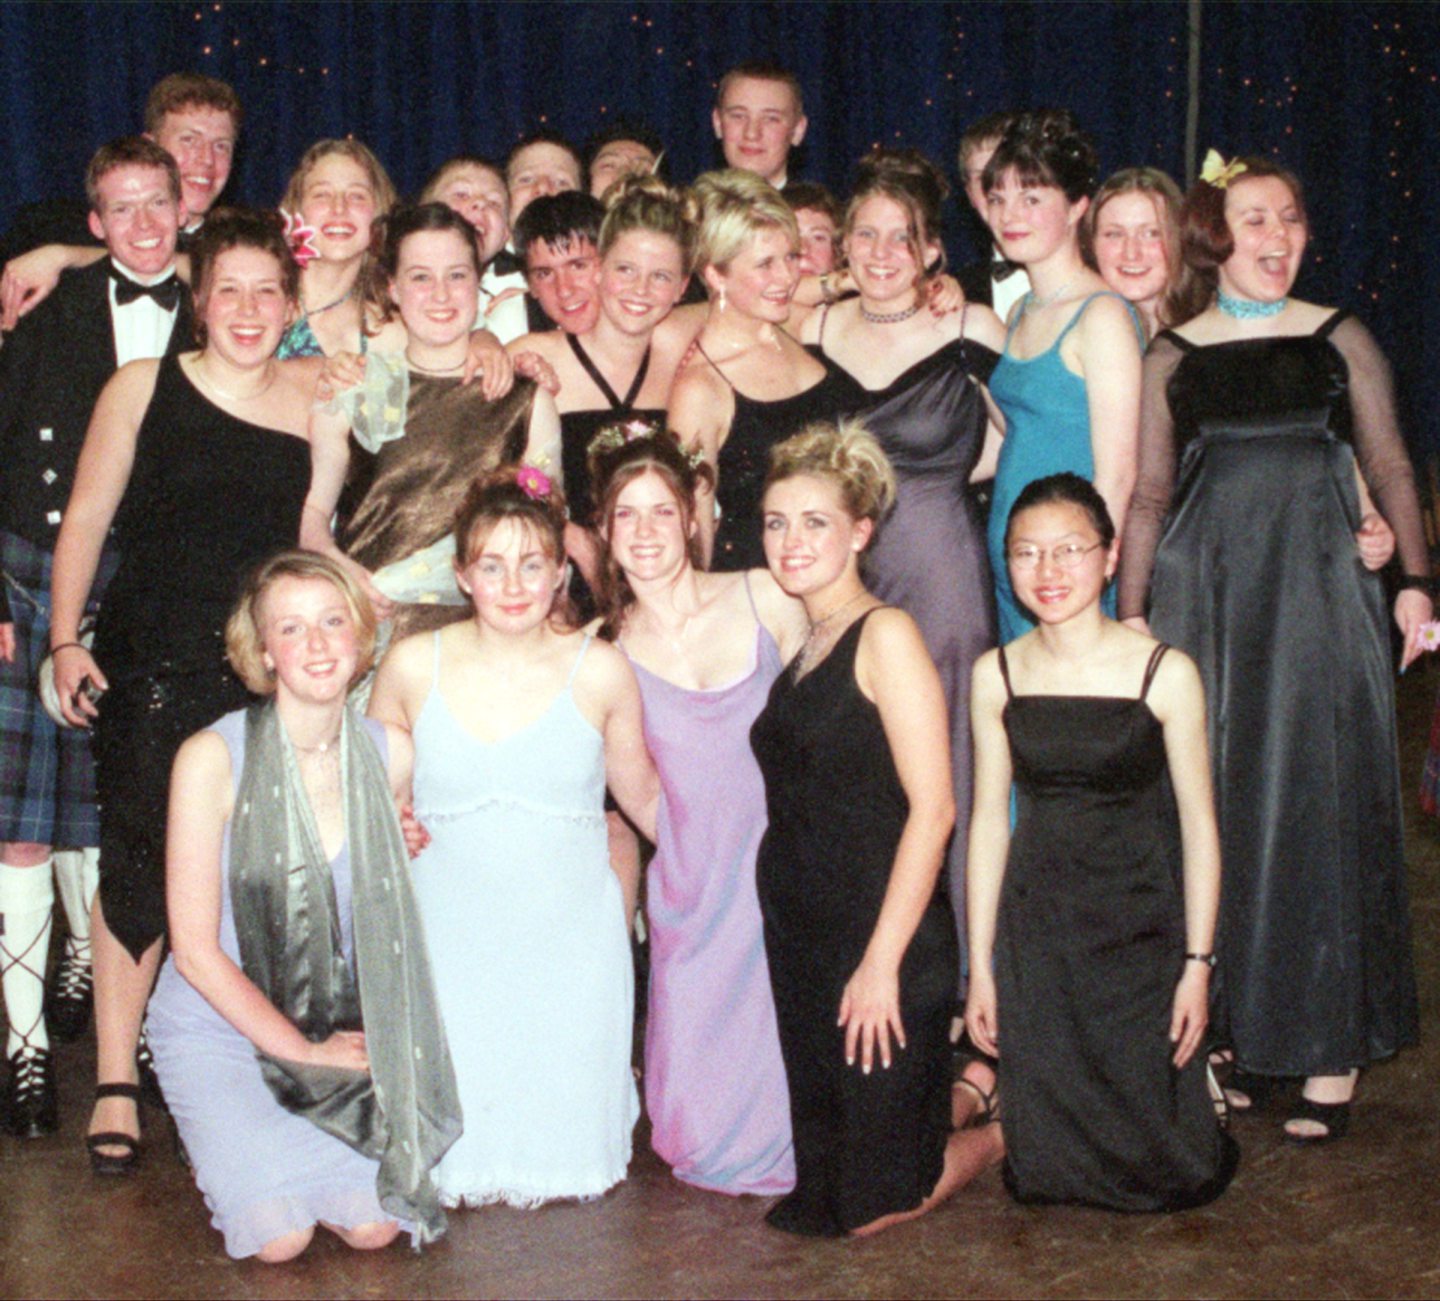  The class of 2000 leavers' ball held at the school.